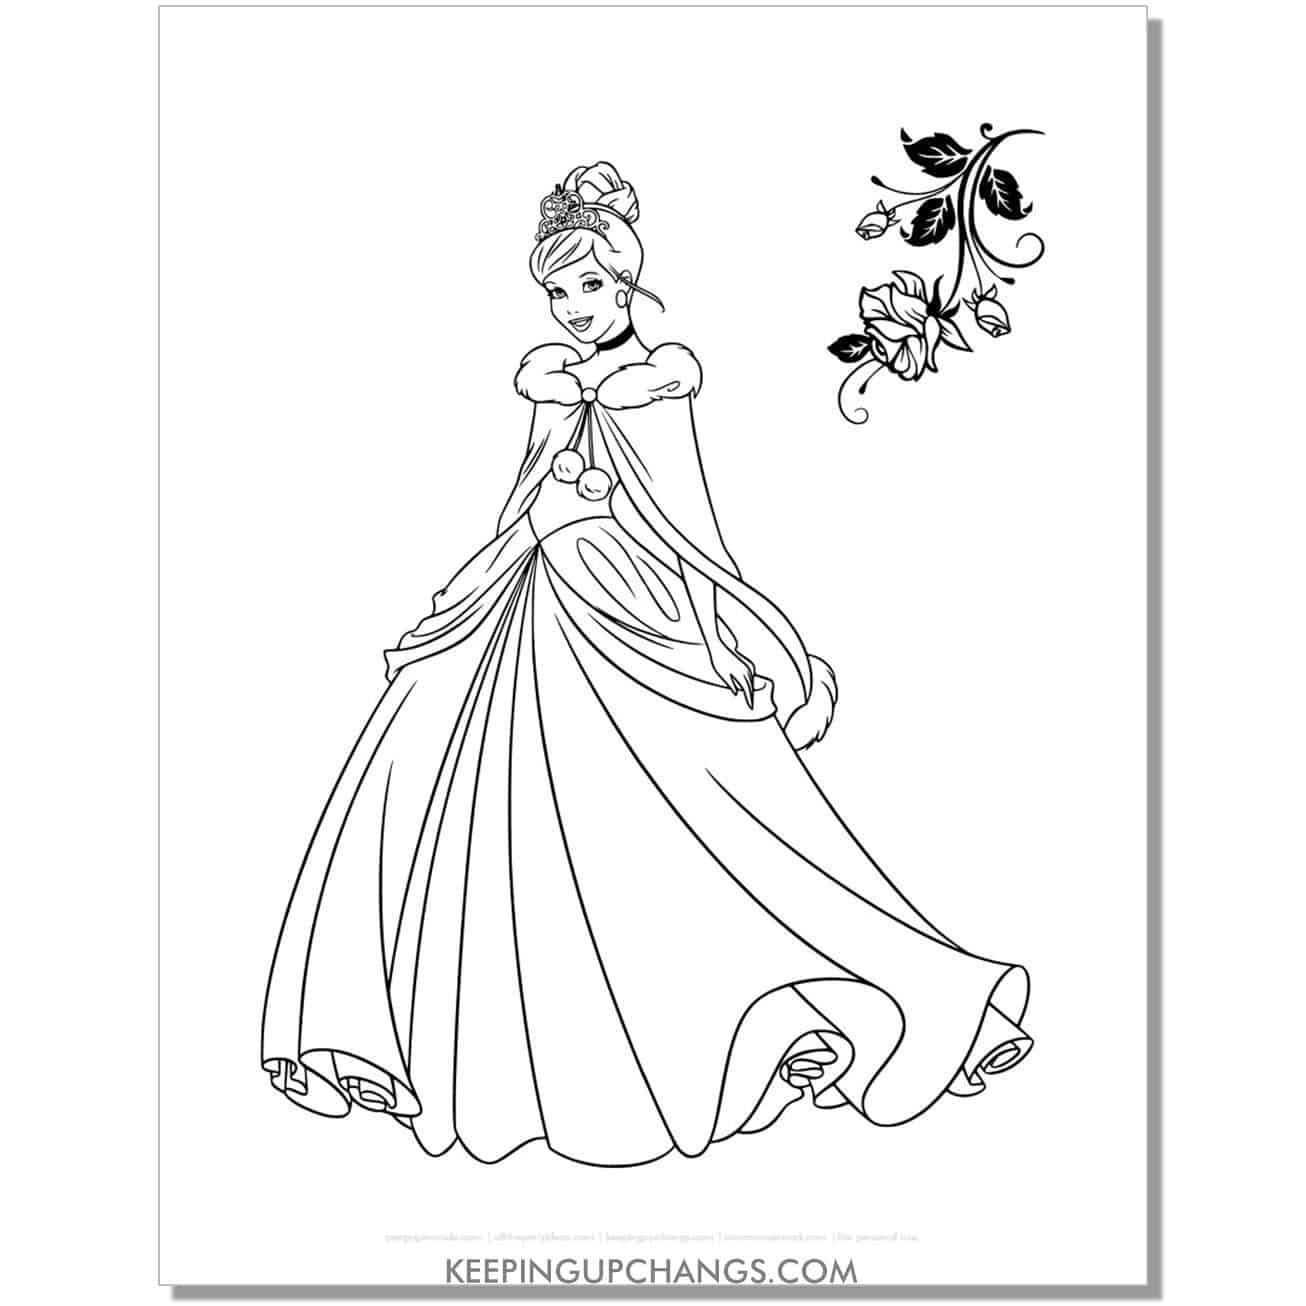 cinderella in beautiful winter gown coloring page, sheet.